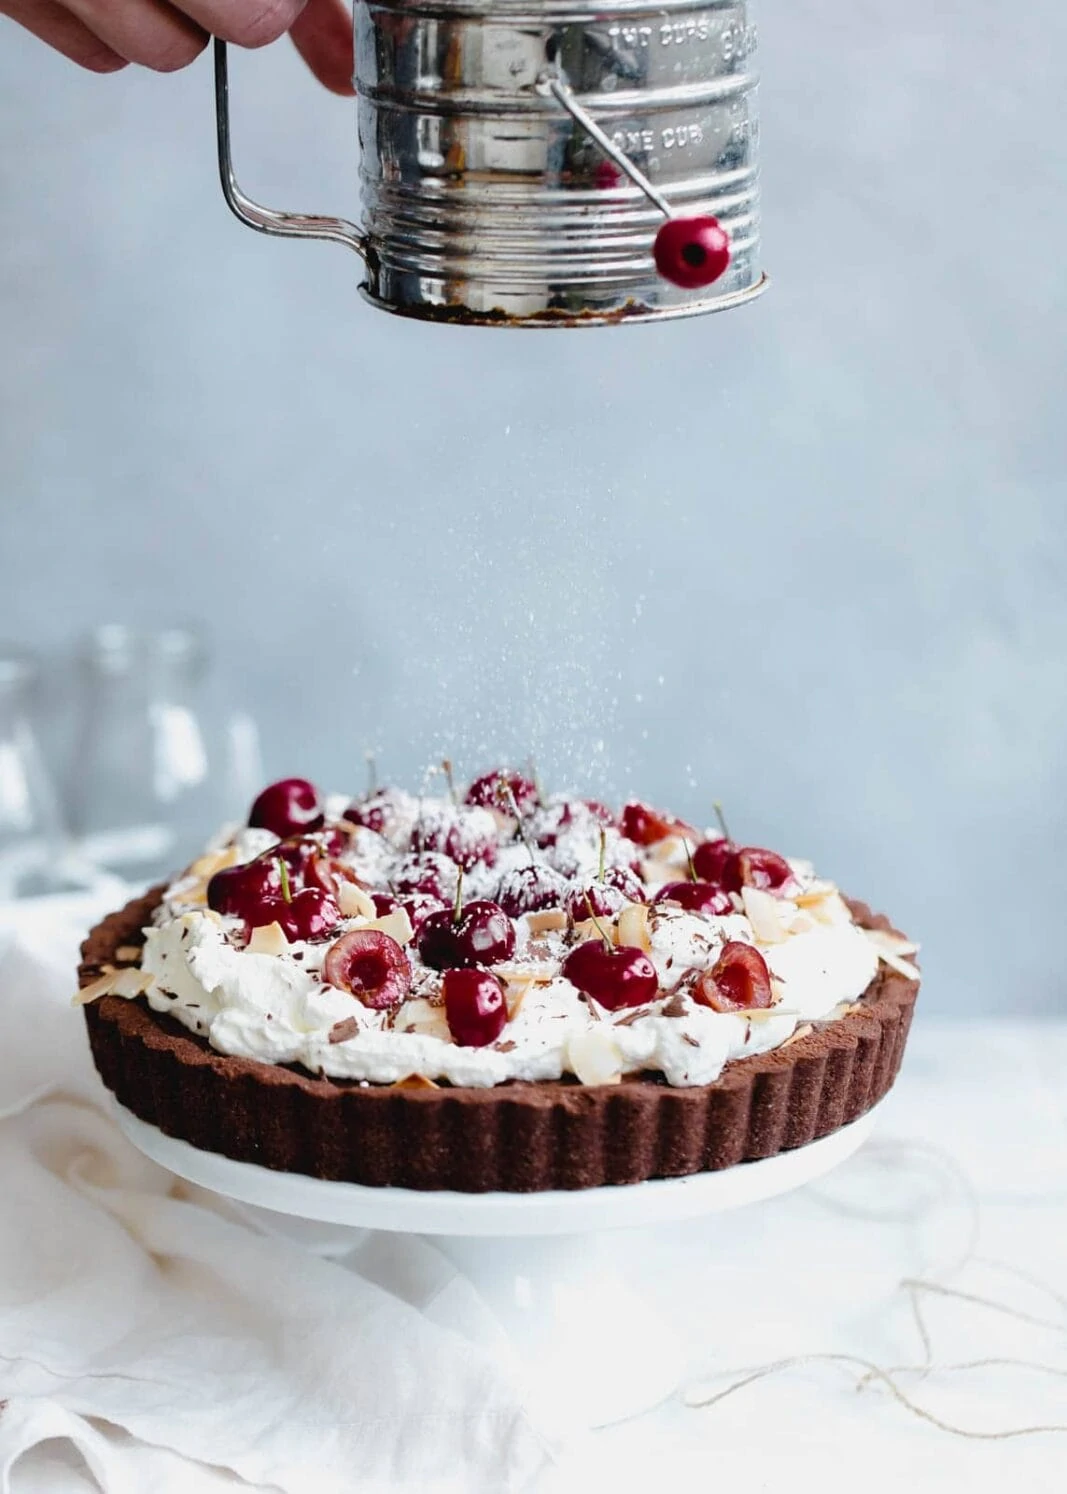 A take on Black Forest Cake, this fudge-like chocolate cherry tart is topped with whipped cream, toasted coconut, and fresh cherries.